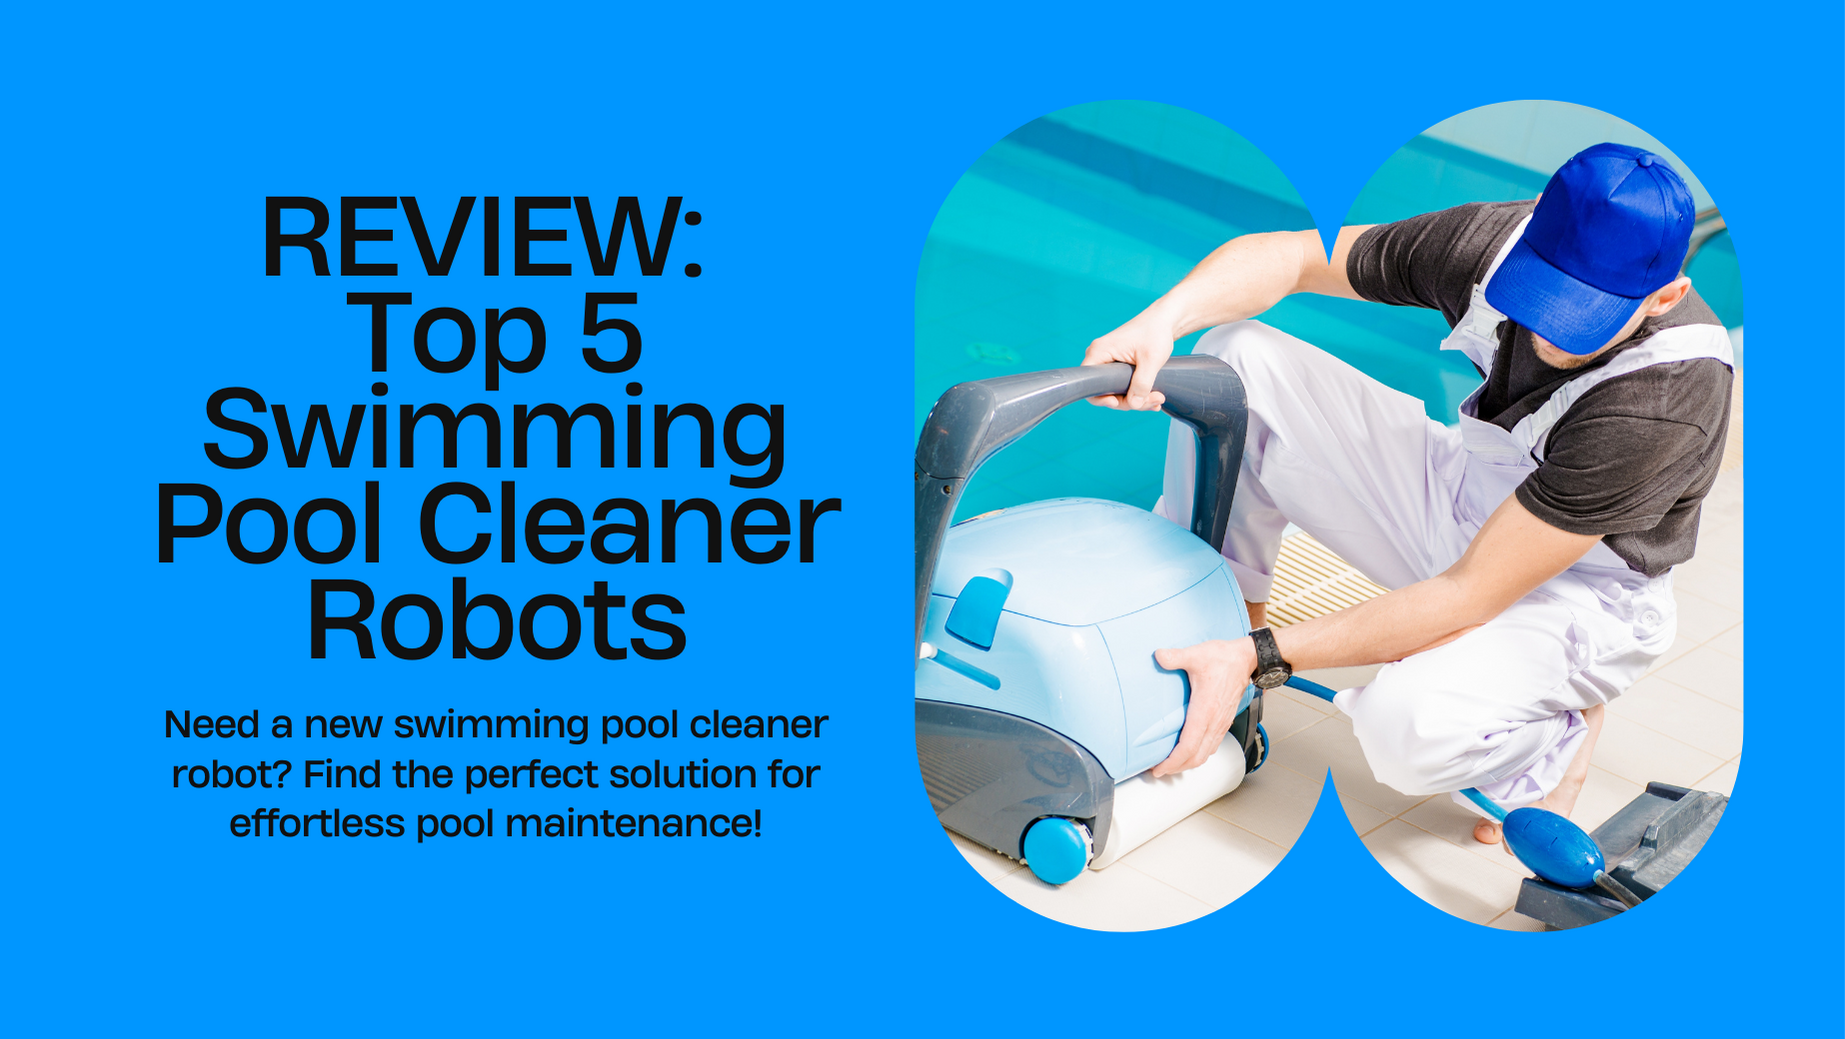 REVIEW: Top 5 Swimming Pool Cleaner Robots